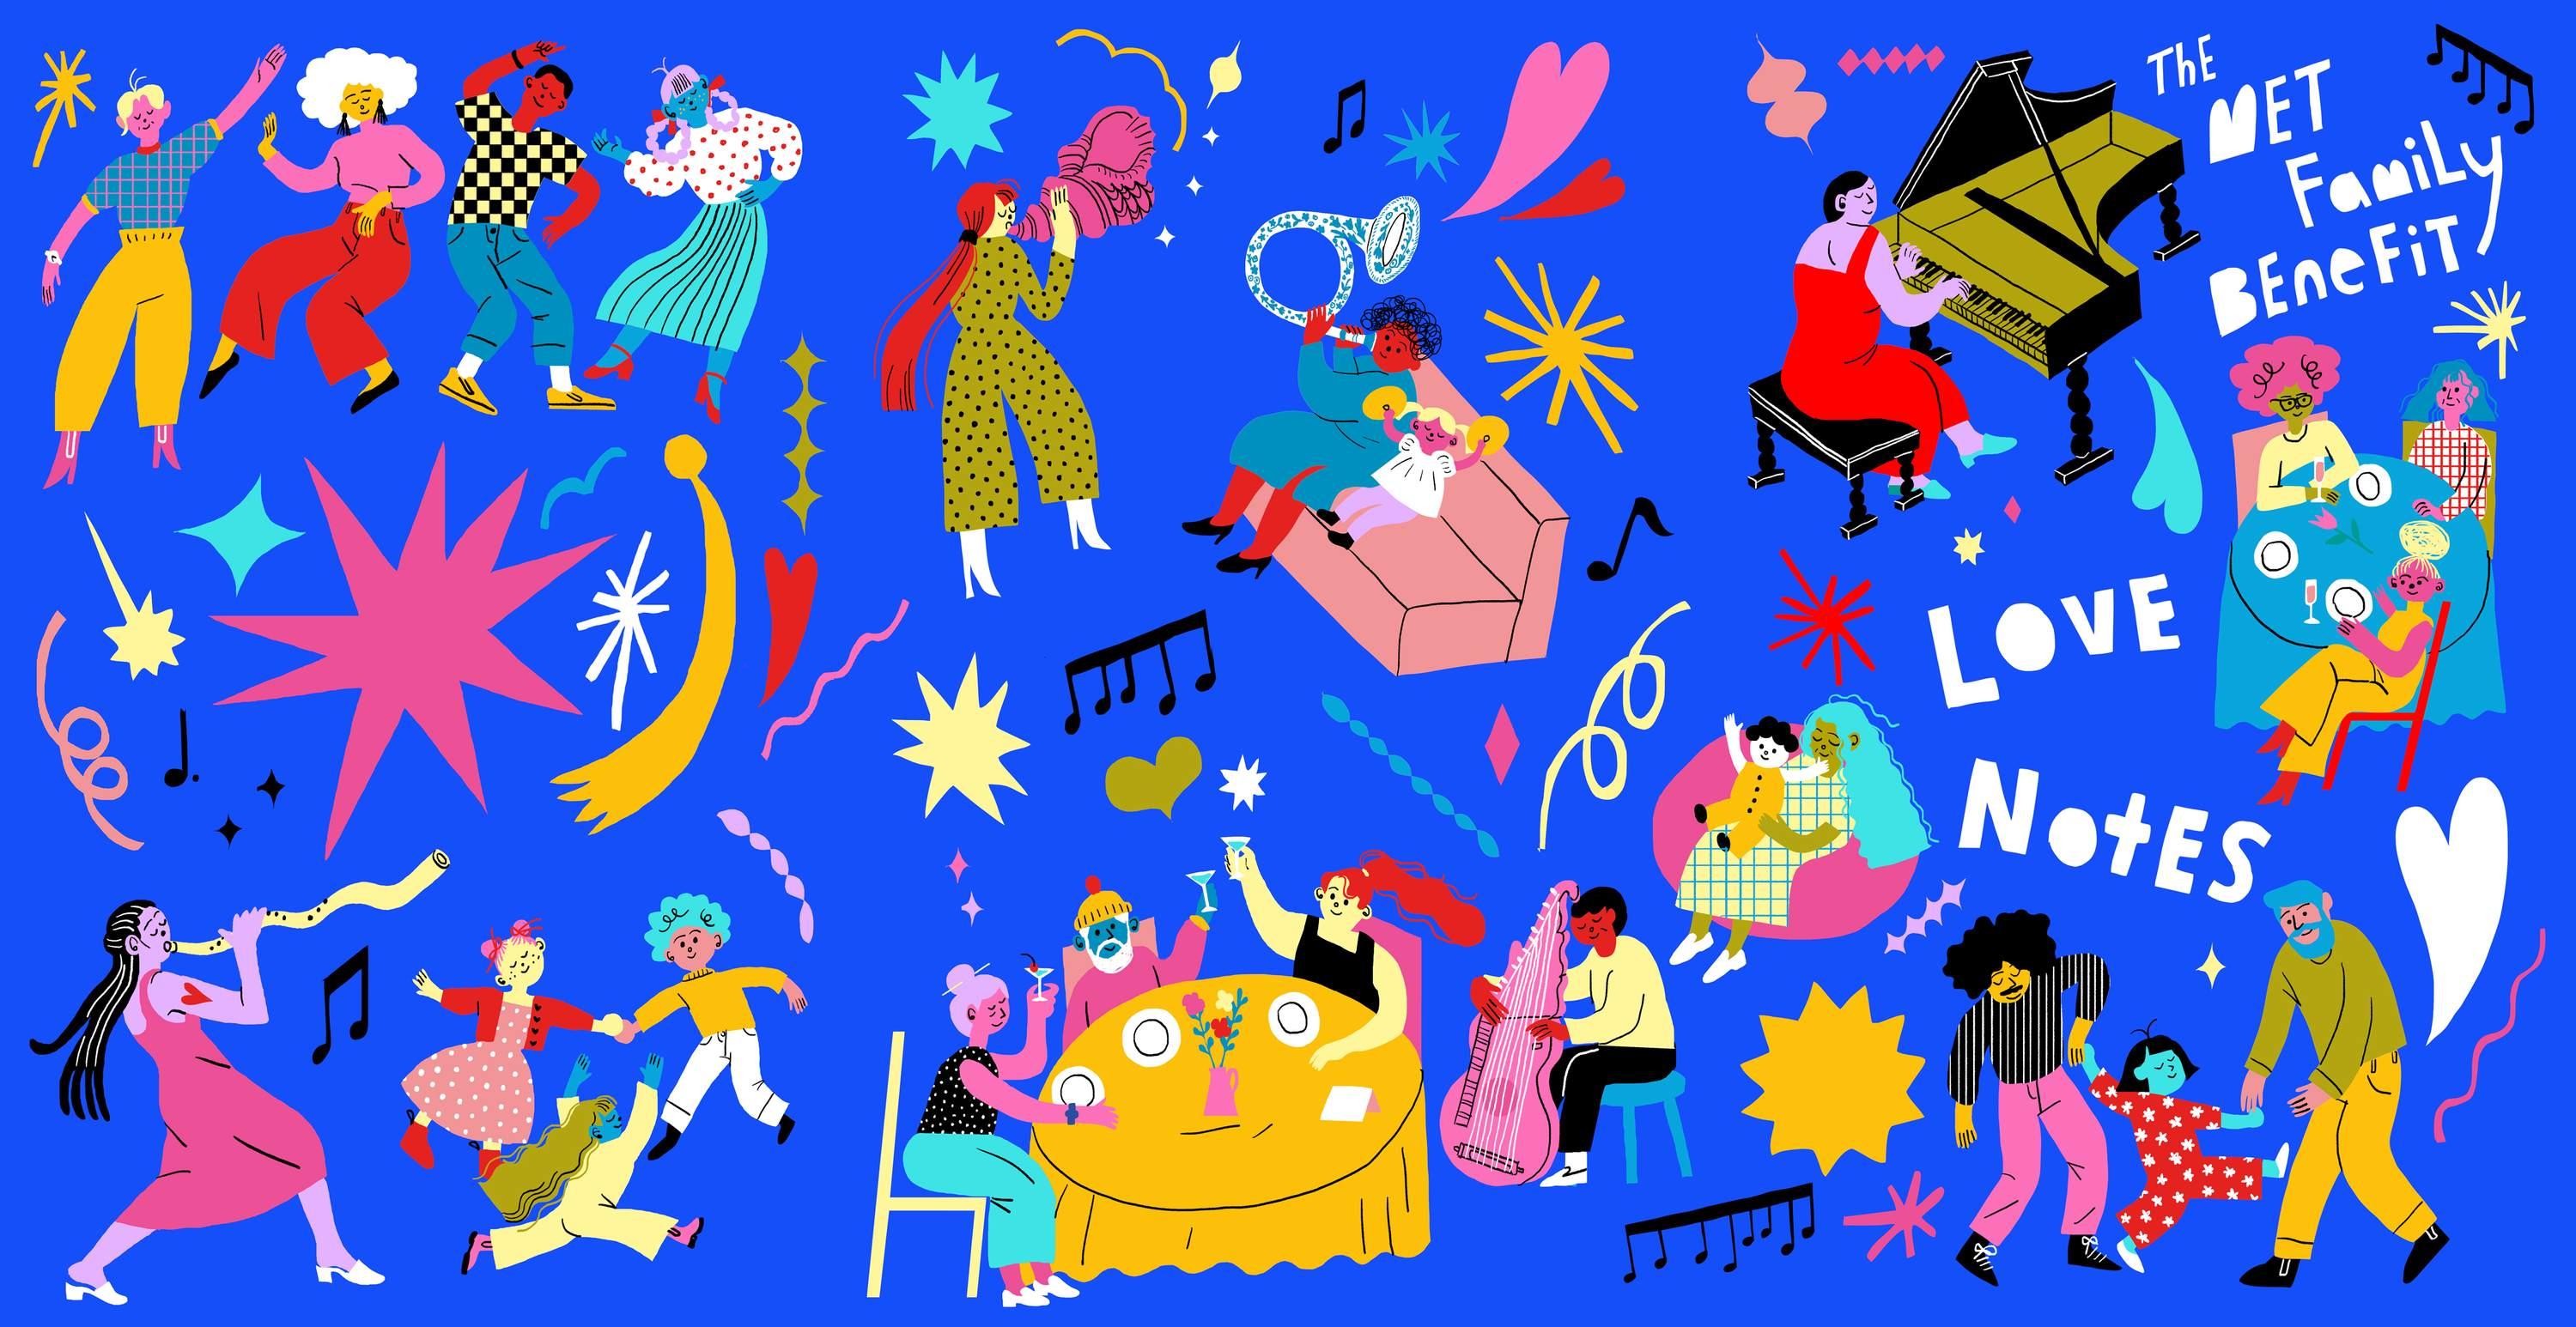 an illustrated group of people performing with instruments, dancing